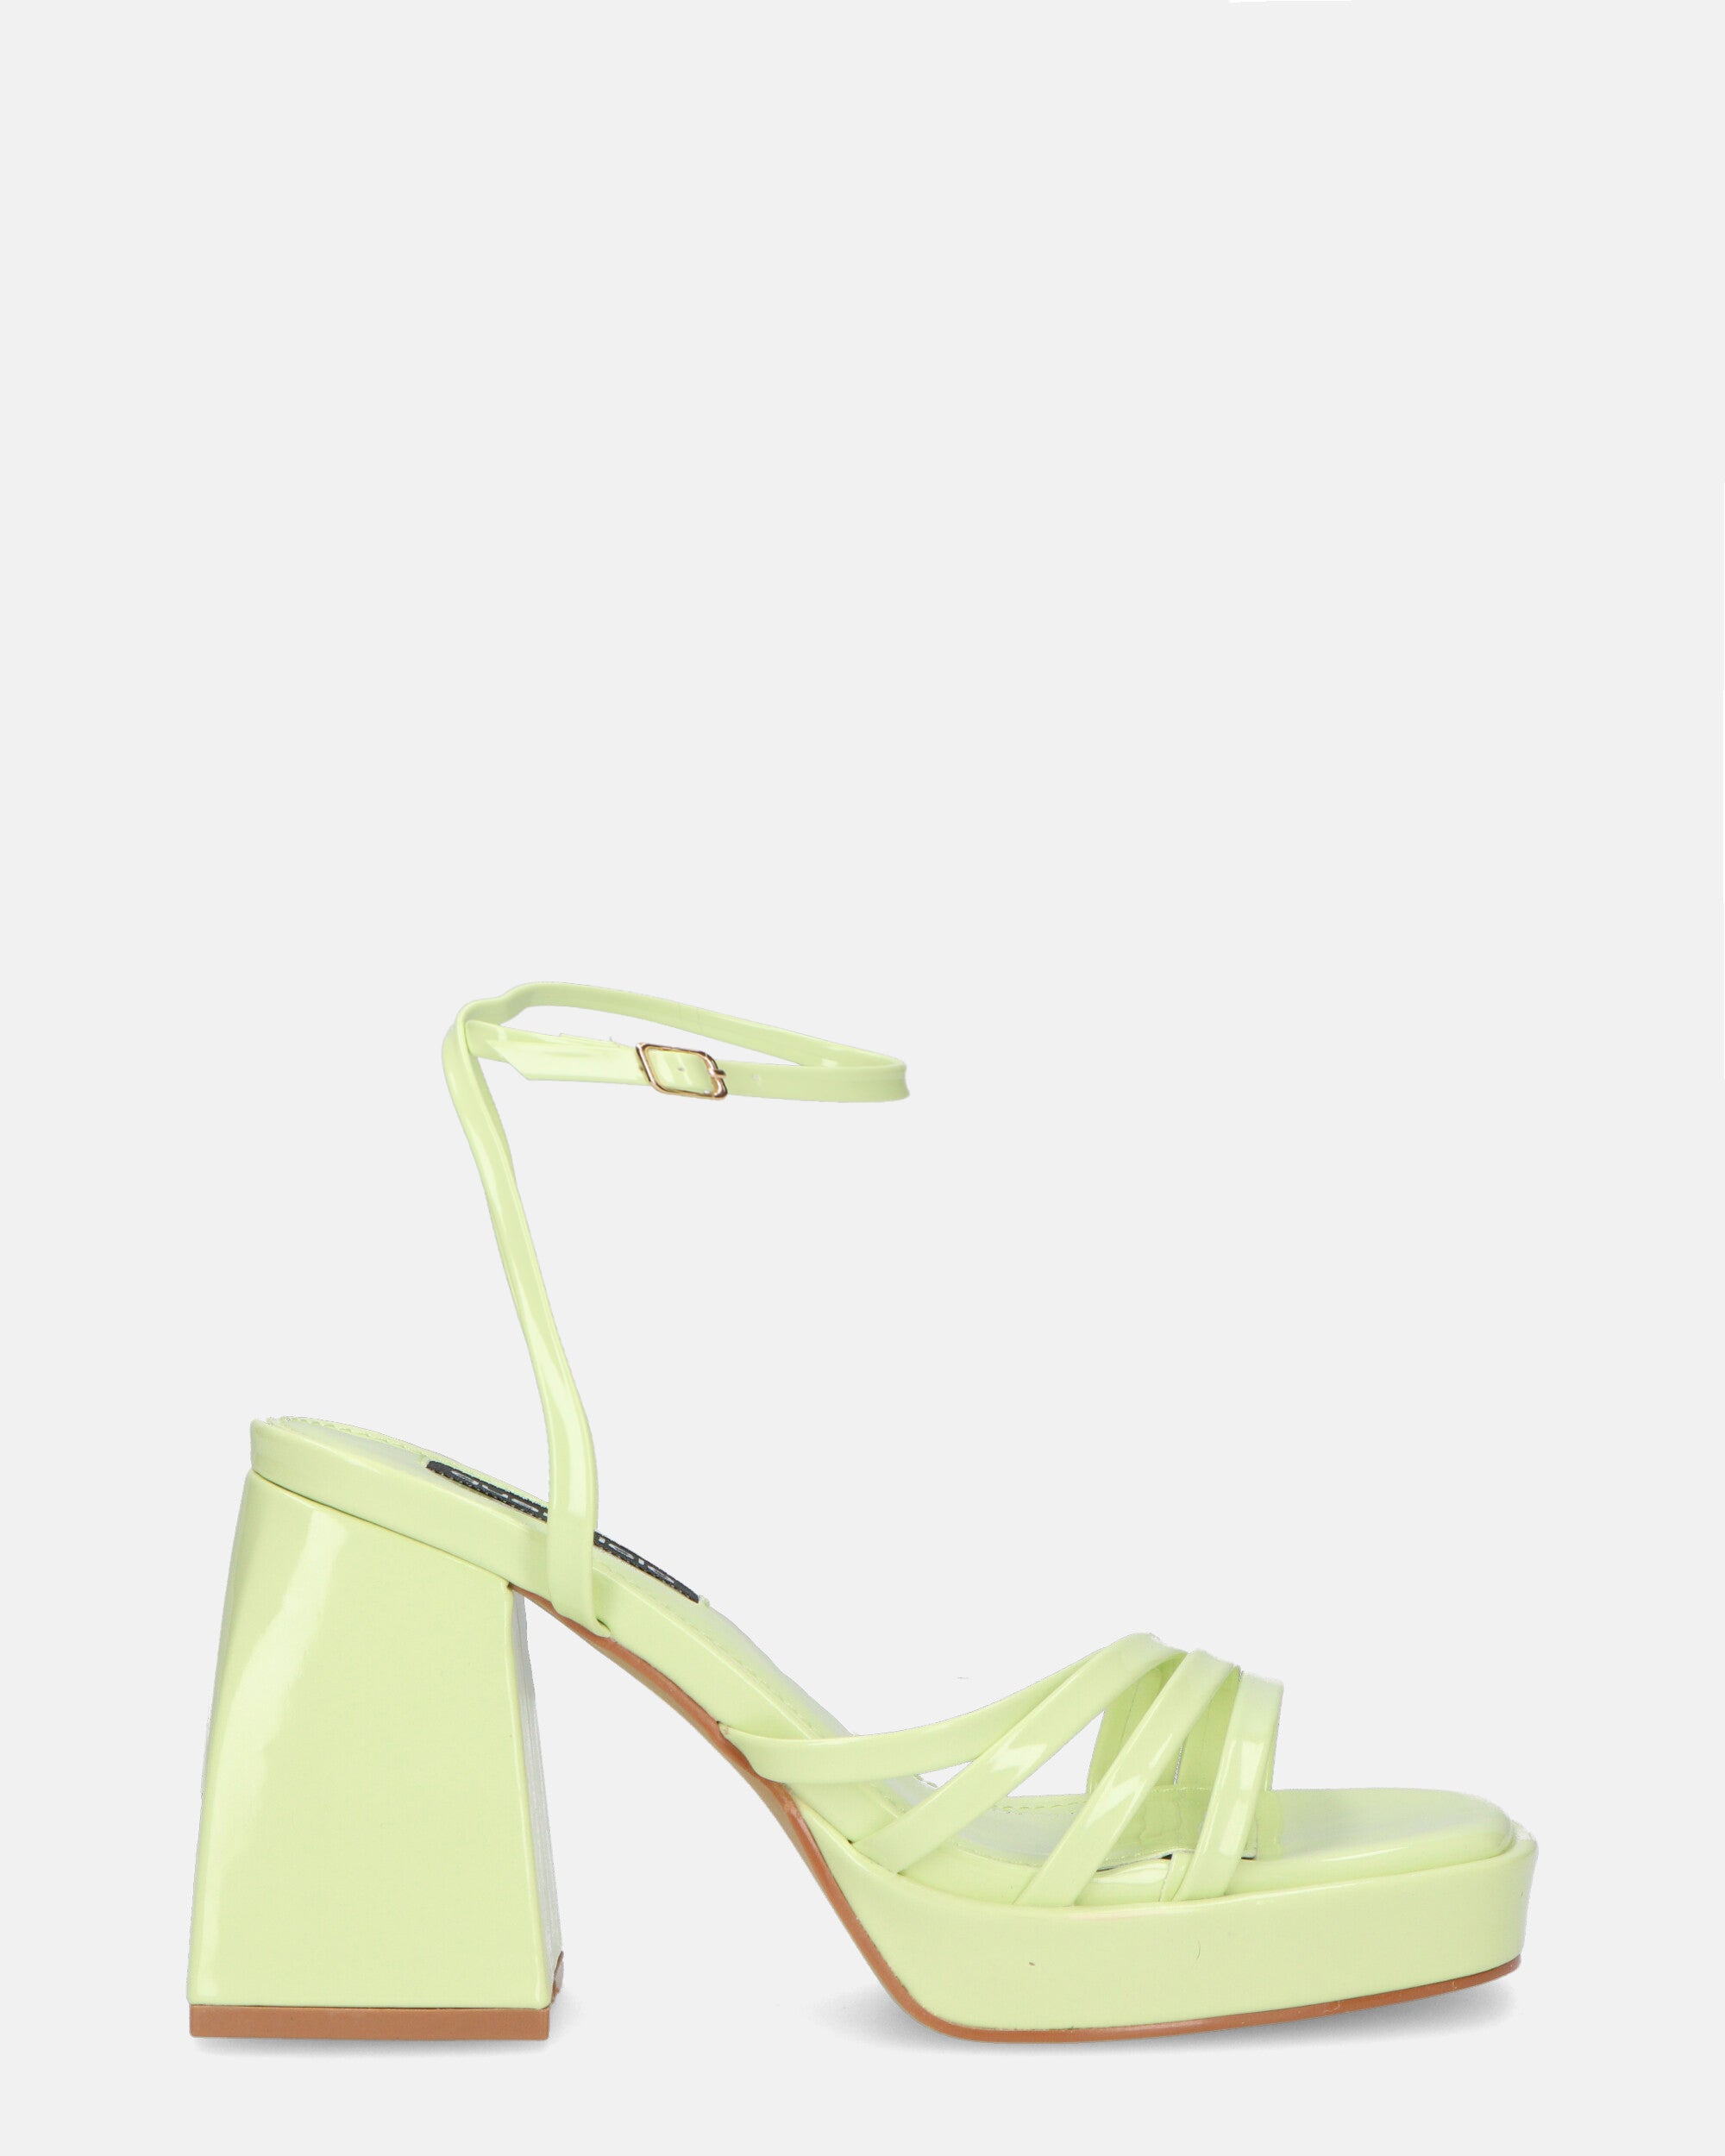 WINONA - light green glassy sandals with squared heel